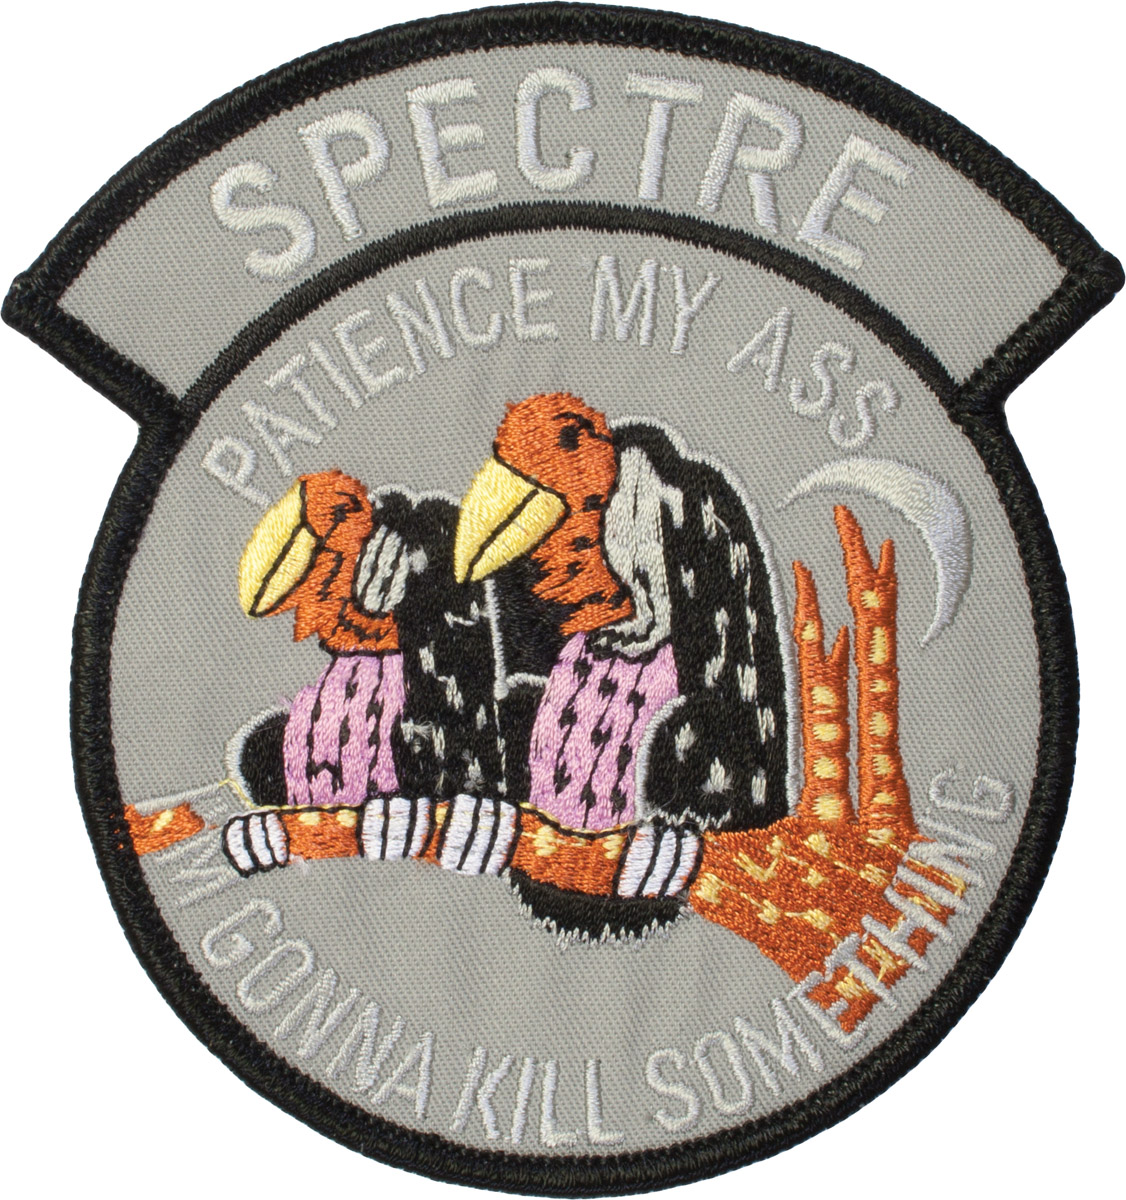 N 522 Spectre Patience My Ass I M Gonna Kill Something Patch